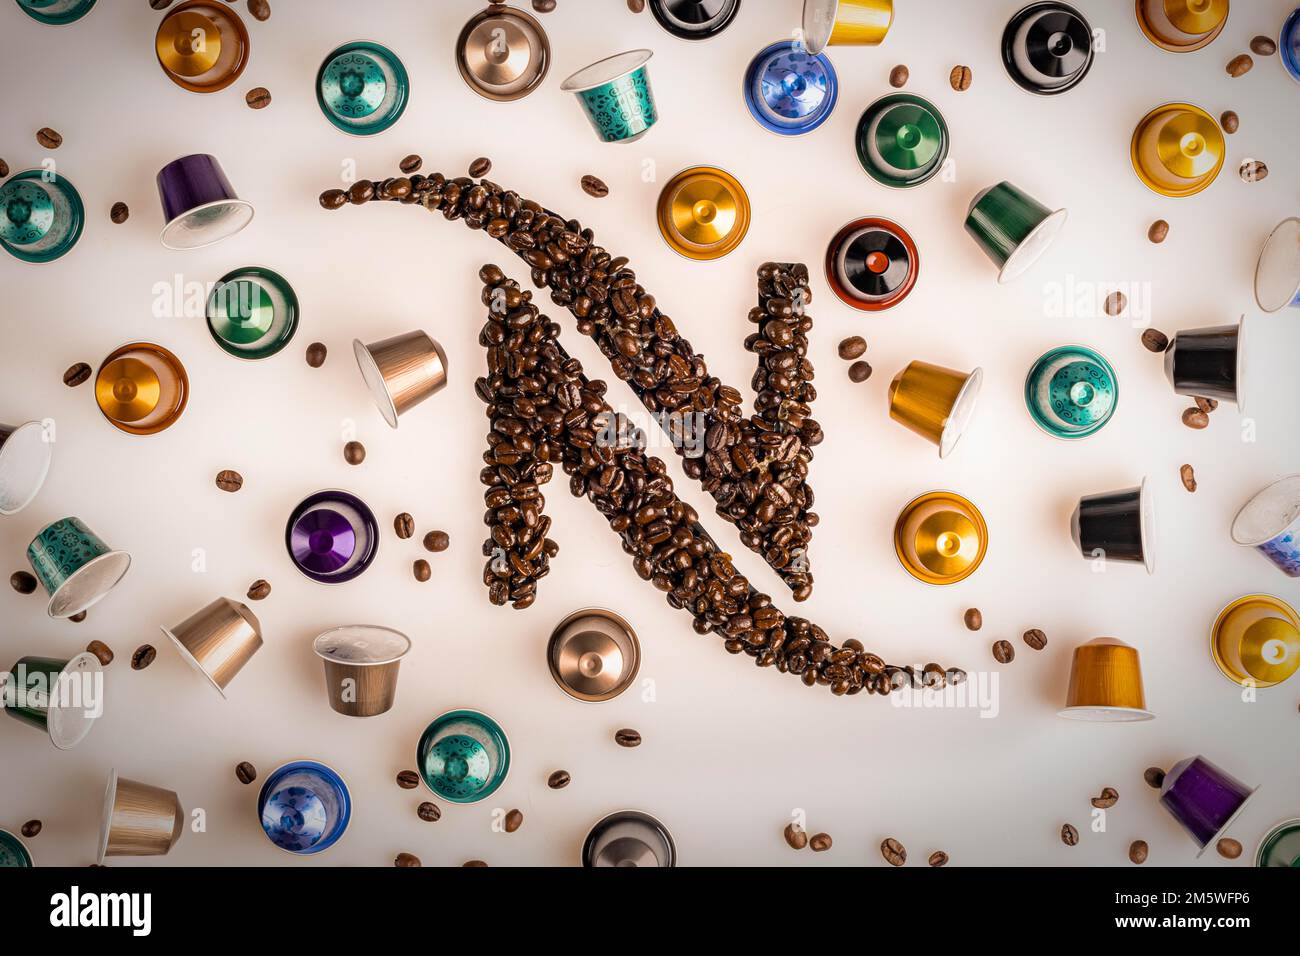 Food photography, Nespresso logo made from coffee beans with Nespresso capsules Stock Photo